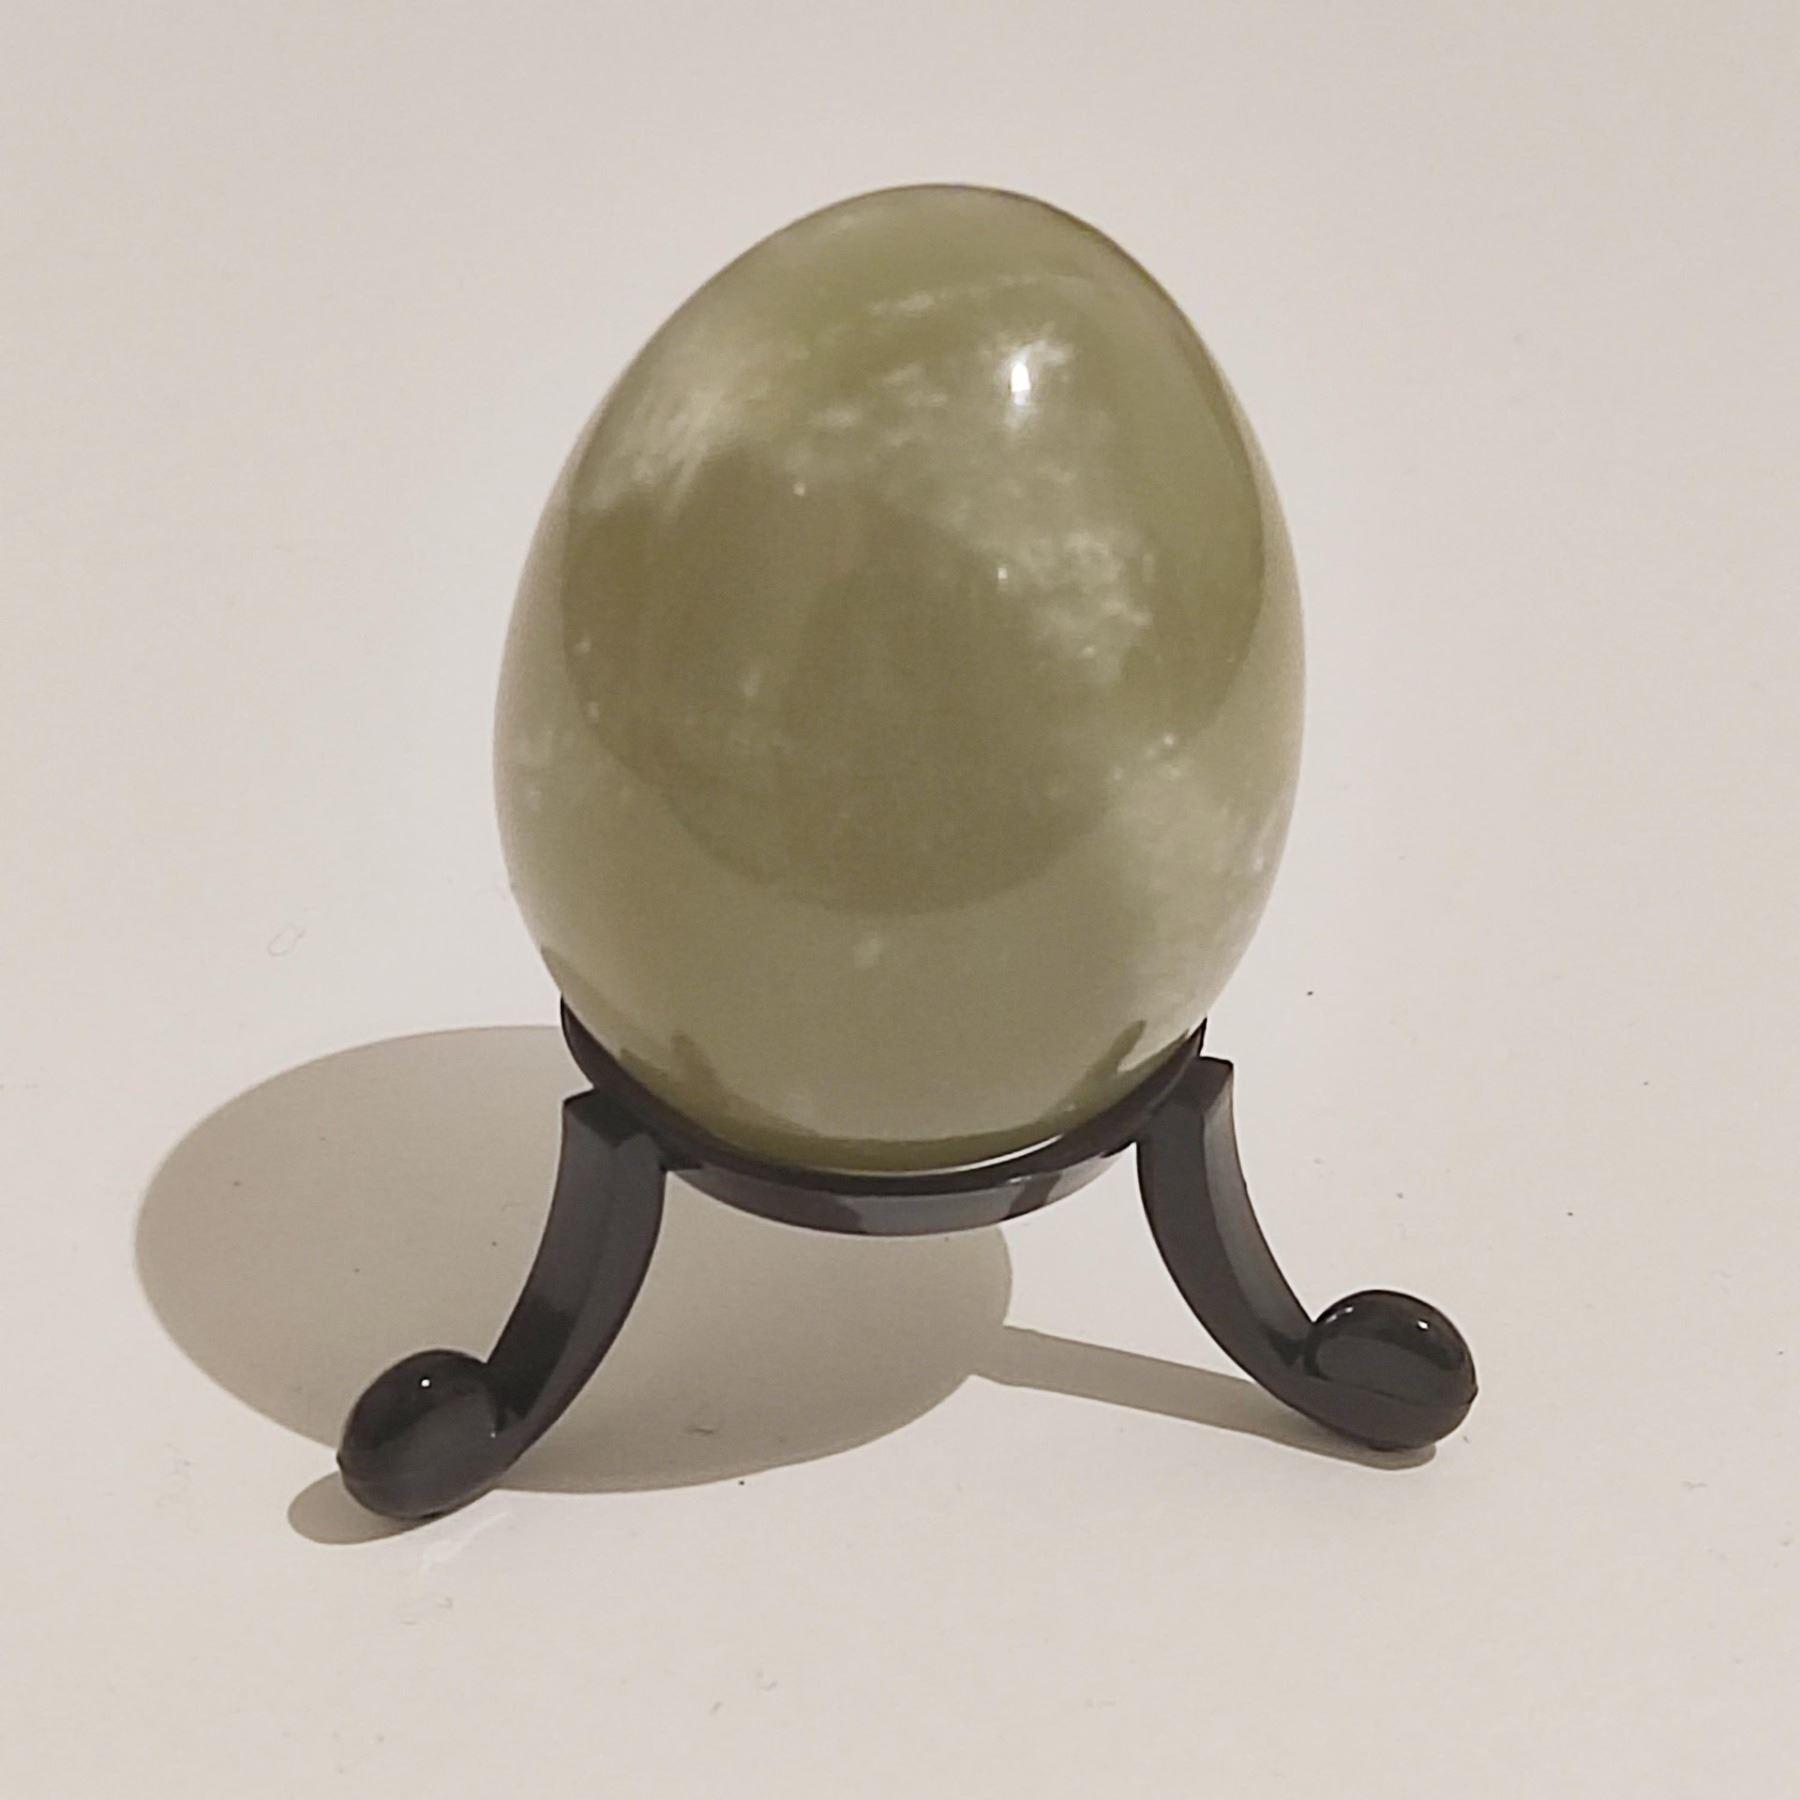 A Nephrite jade egg from Brazil, no stand included, and a Chalcedony stalacite crystal from Peru.